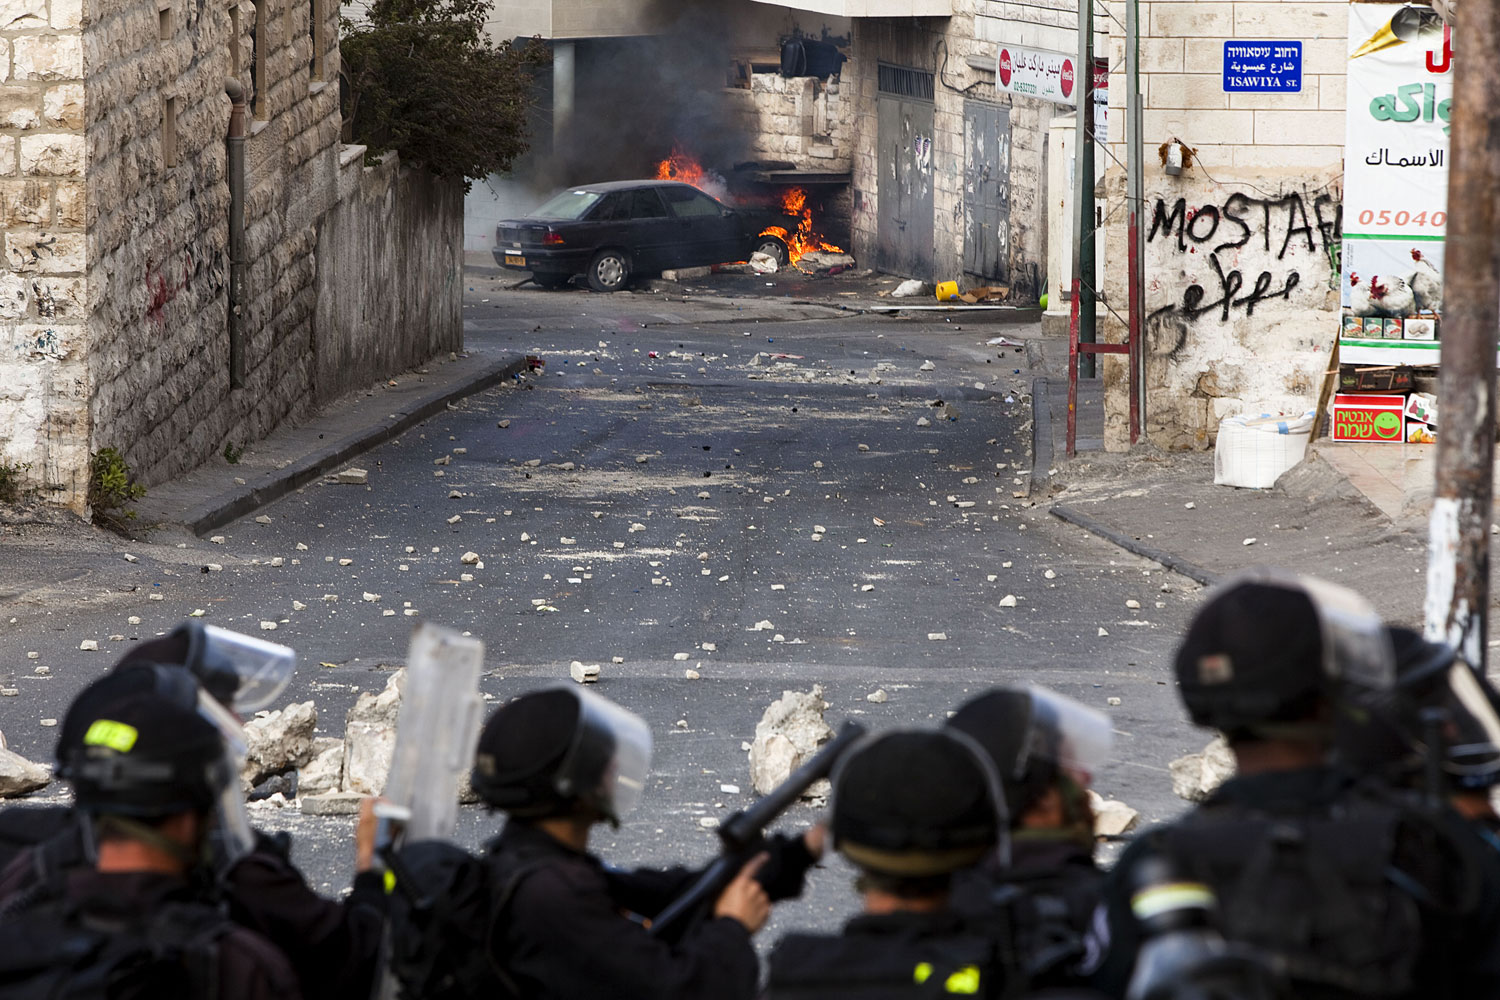 Israeli police take position at the opposite end of the street during clashes with Palestinian youths. The days leading up to the  Nakba  on May 15th — when Palestinians commemorate their exodus and Israel's independence of 1948—are particularly tense.